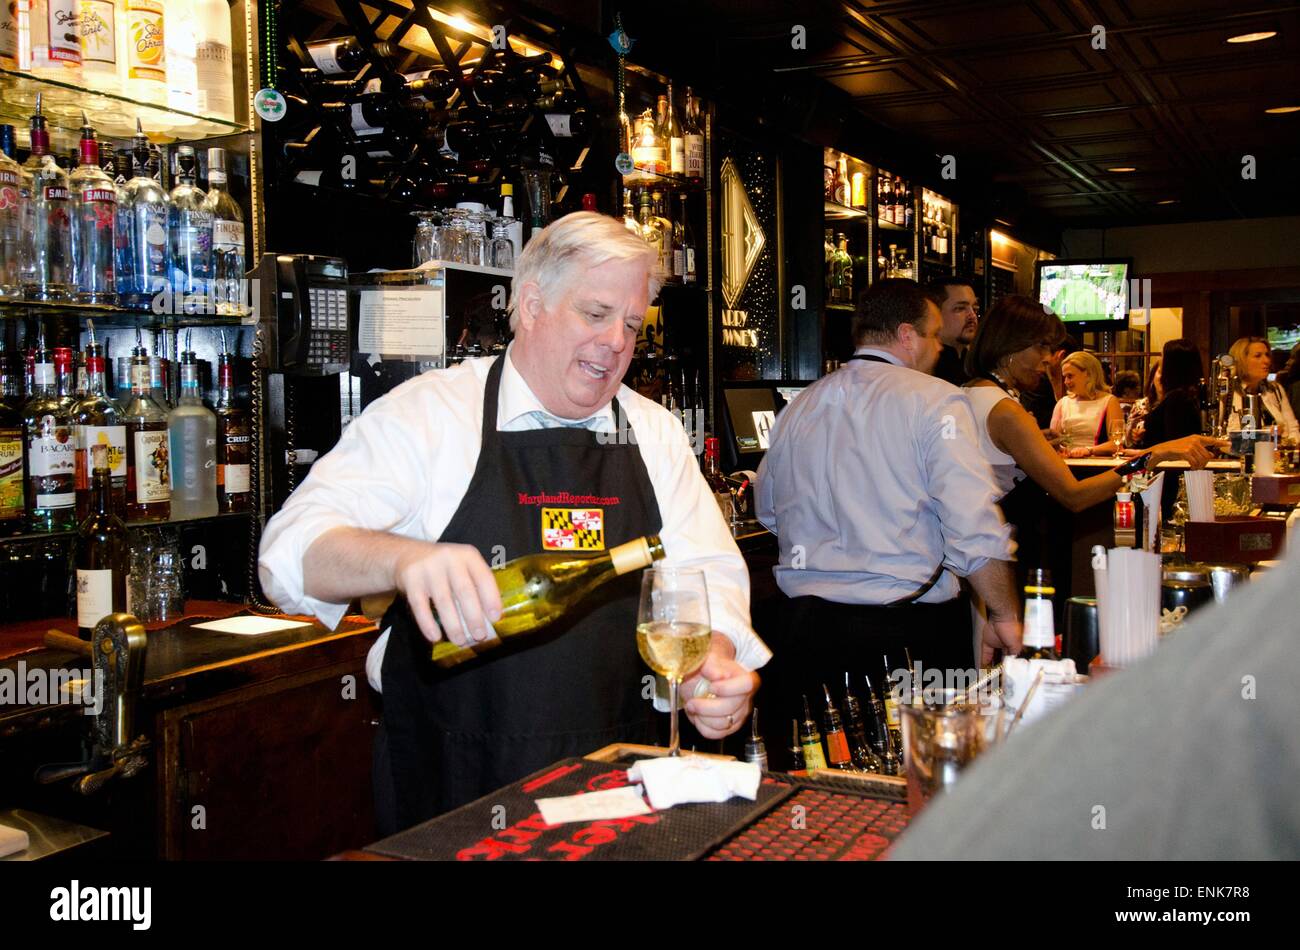 Governor of Maryland Larry Hogan steps behind the bar as a guest bartender at Harry Browns April 9, 2015 in Annapolis, Maryland. Stock Photo